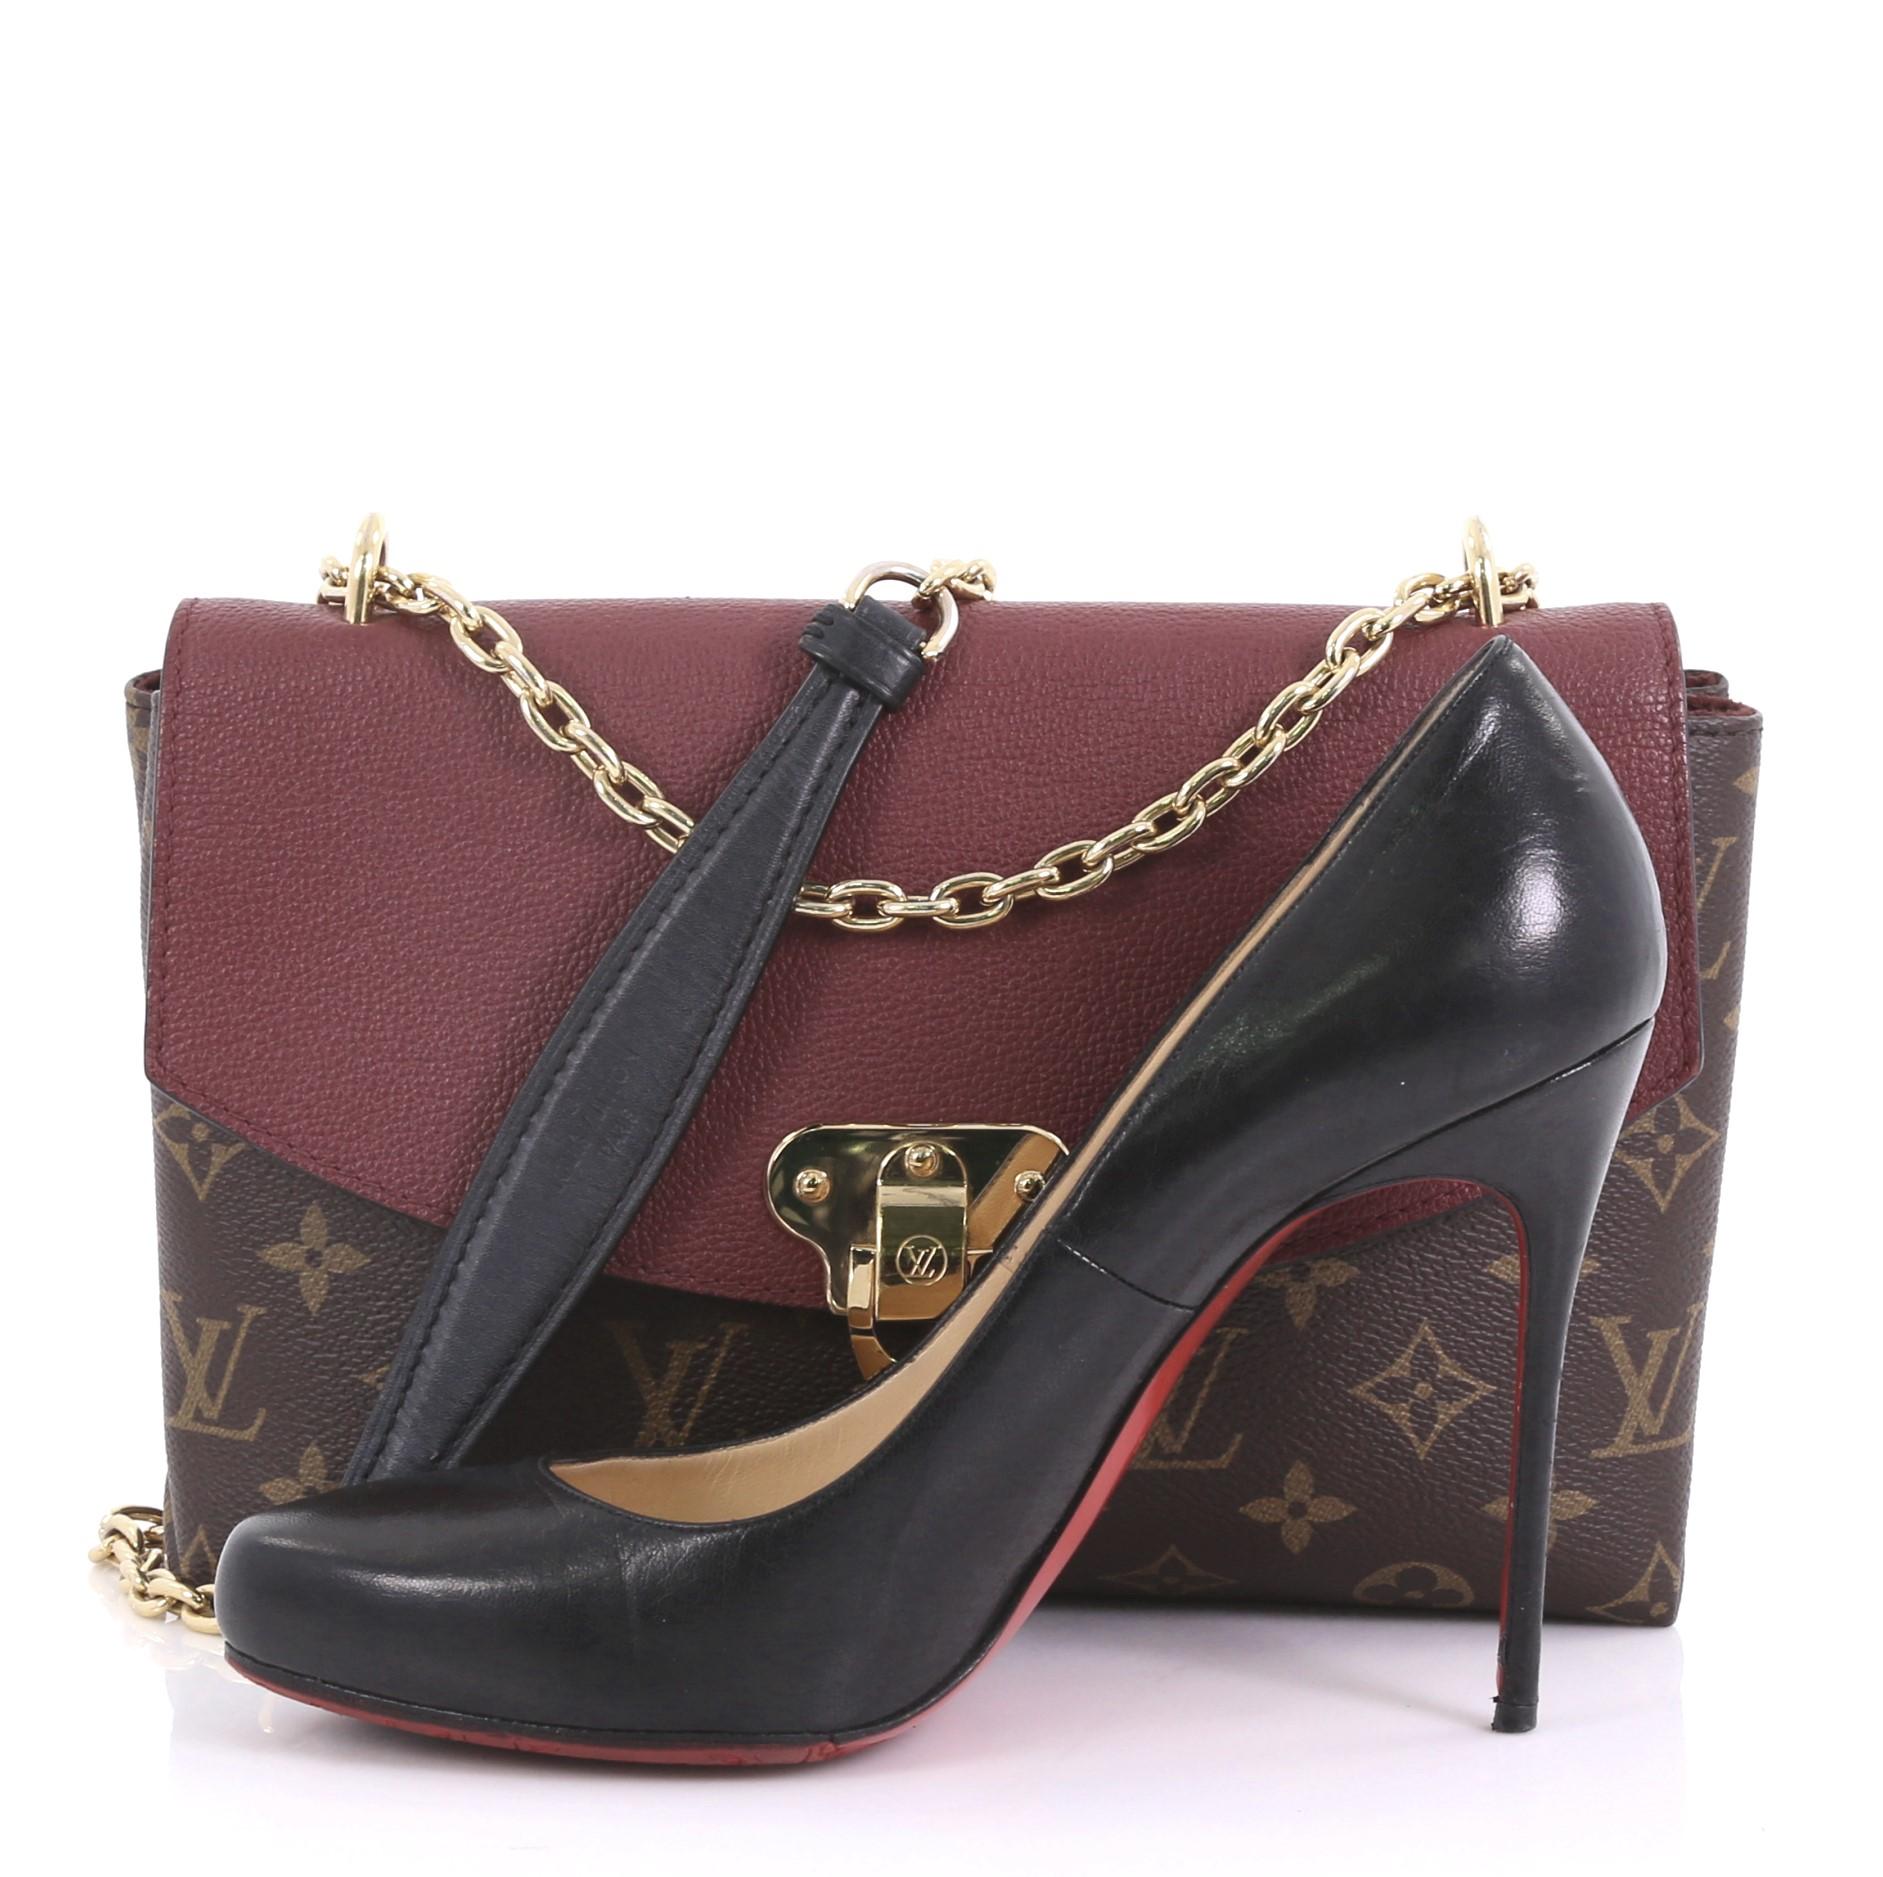 This Louis Vuitton Saint Placide Handbag Monogram Canvas and Leather, crafted in brown monogram coated canvas and burgundy leather, features a sliding chain-link shoulder strap with a leather pad and gold-tone hardware. Its flip-lock closure opens